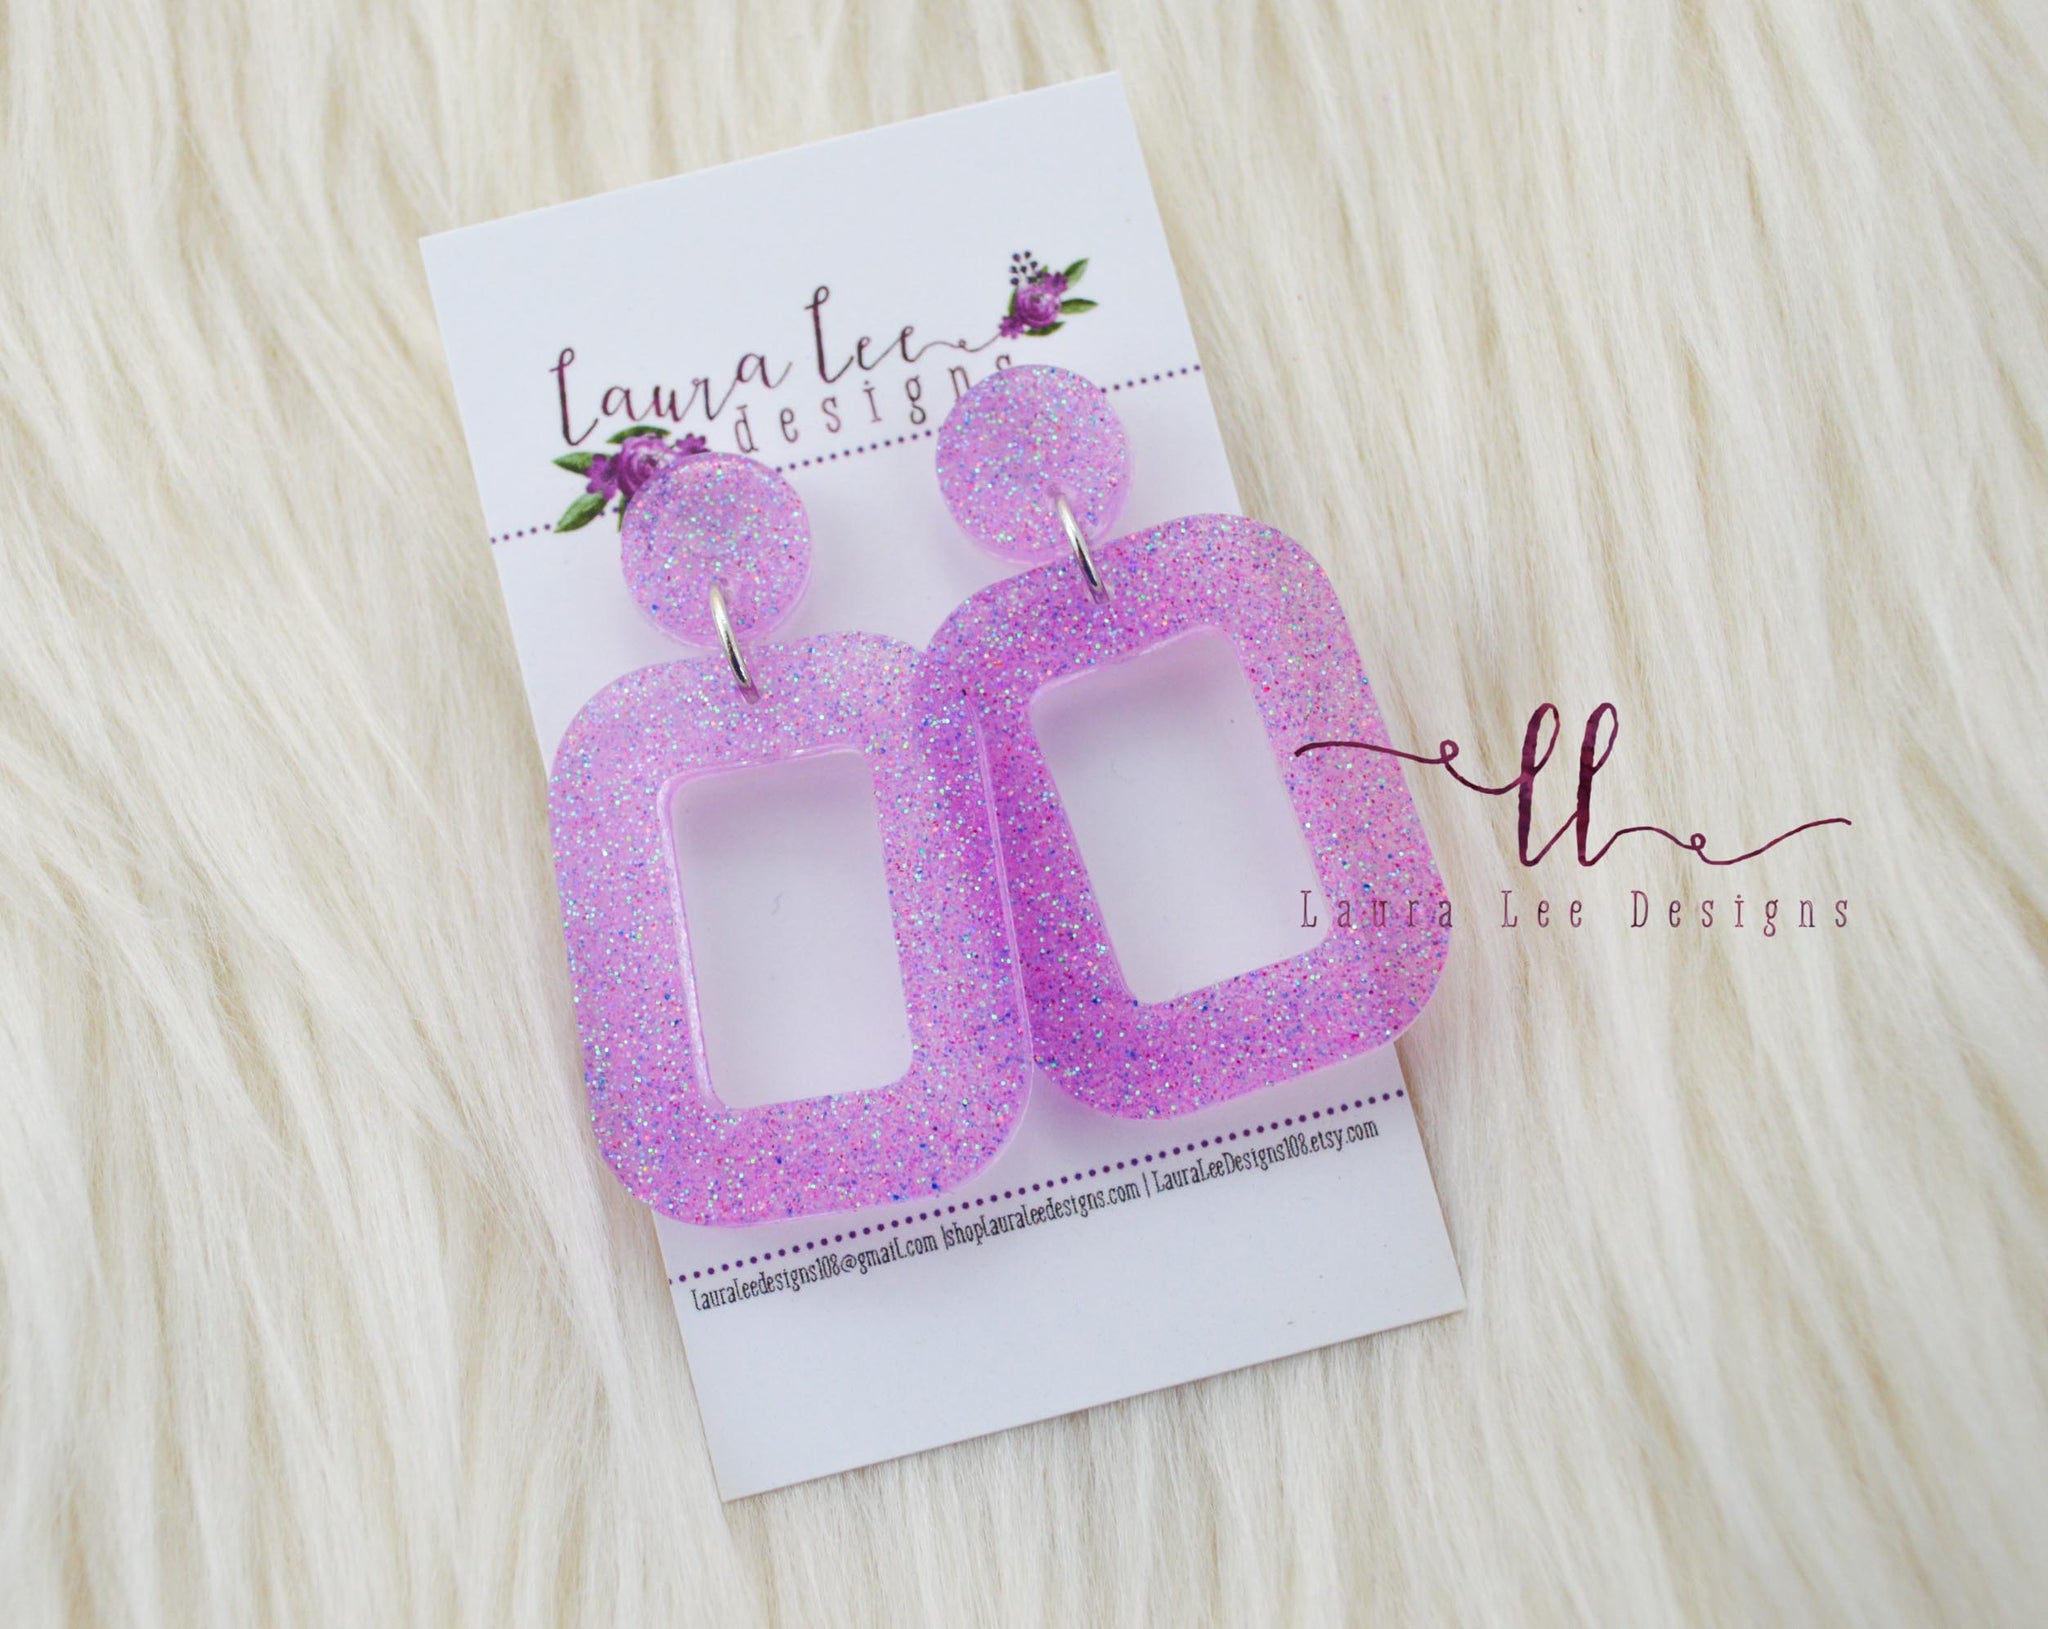 Purple Resin Hoop Earrings with Glitter Inclusion, Golden Brass Studs with Little Bees